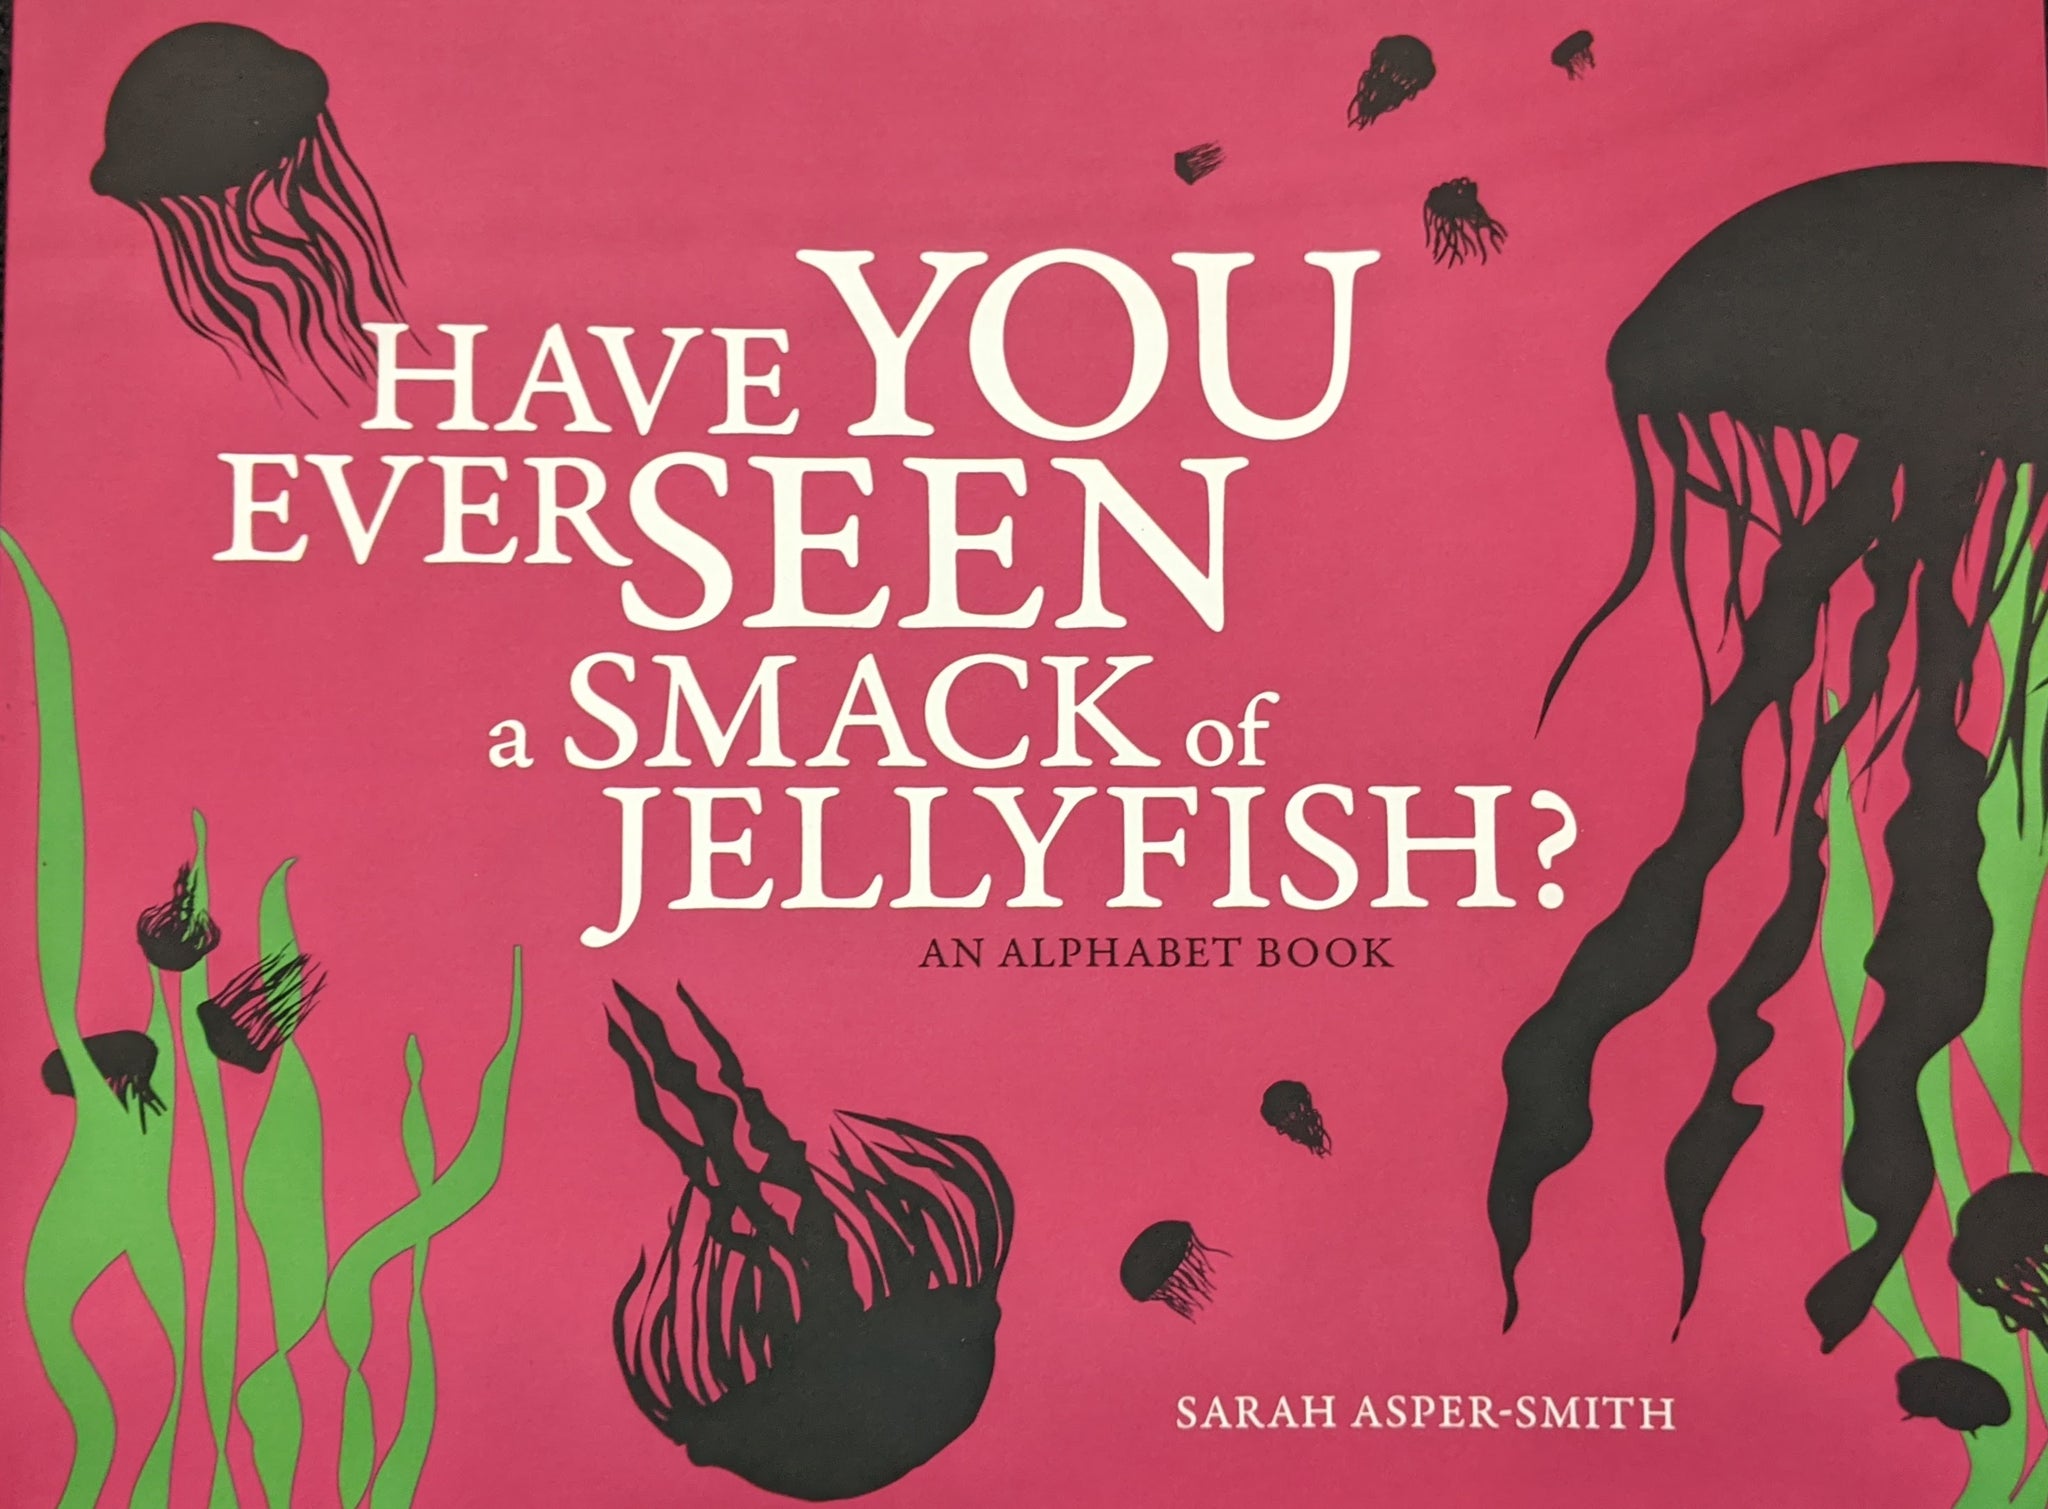 Have You Ever Seen a Smack of Jellyfish?